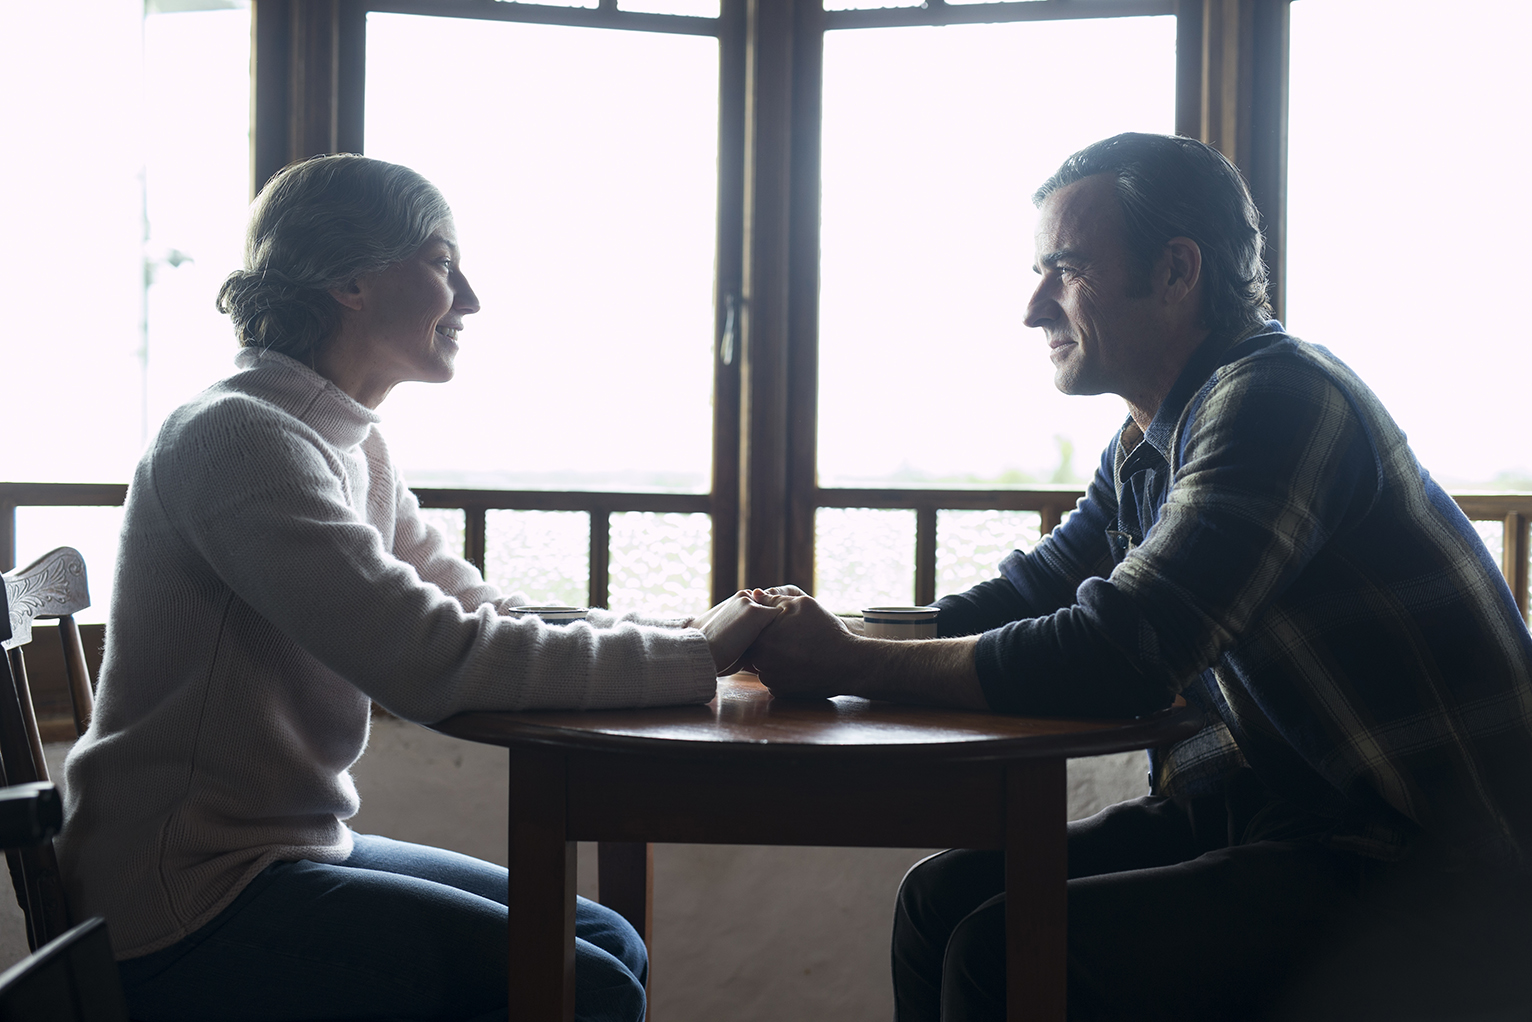 The Leftovers Ended With The Perfect Balance Of Answered And Unanswered Questions